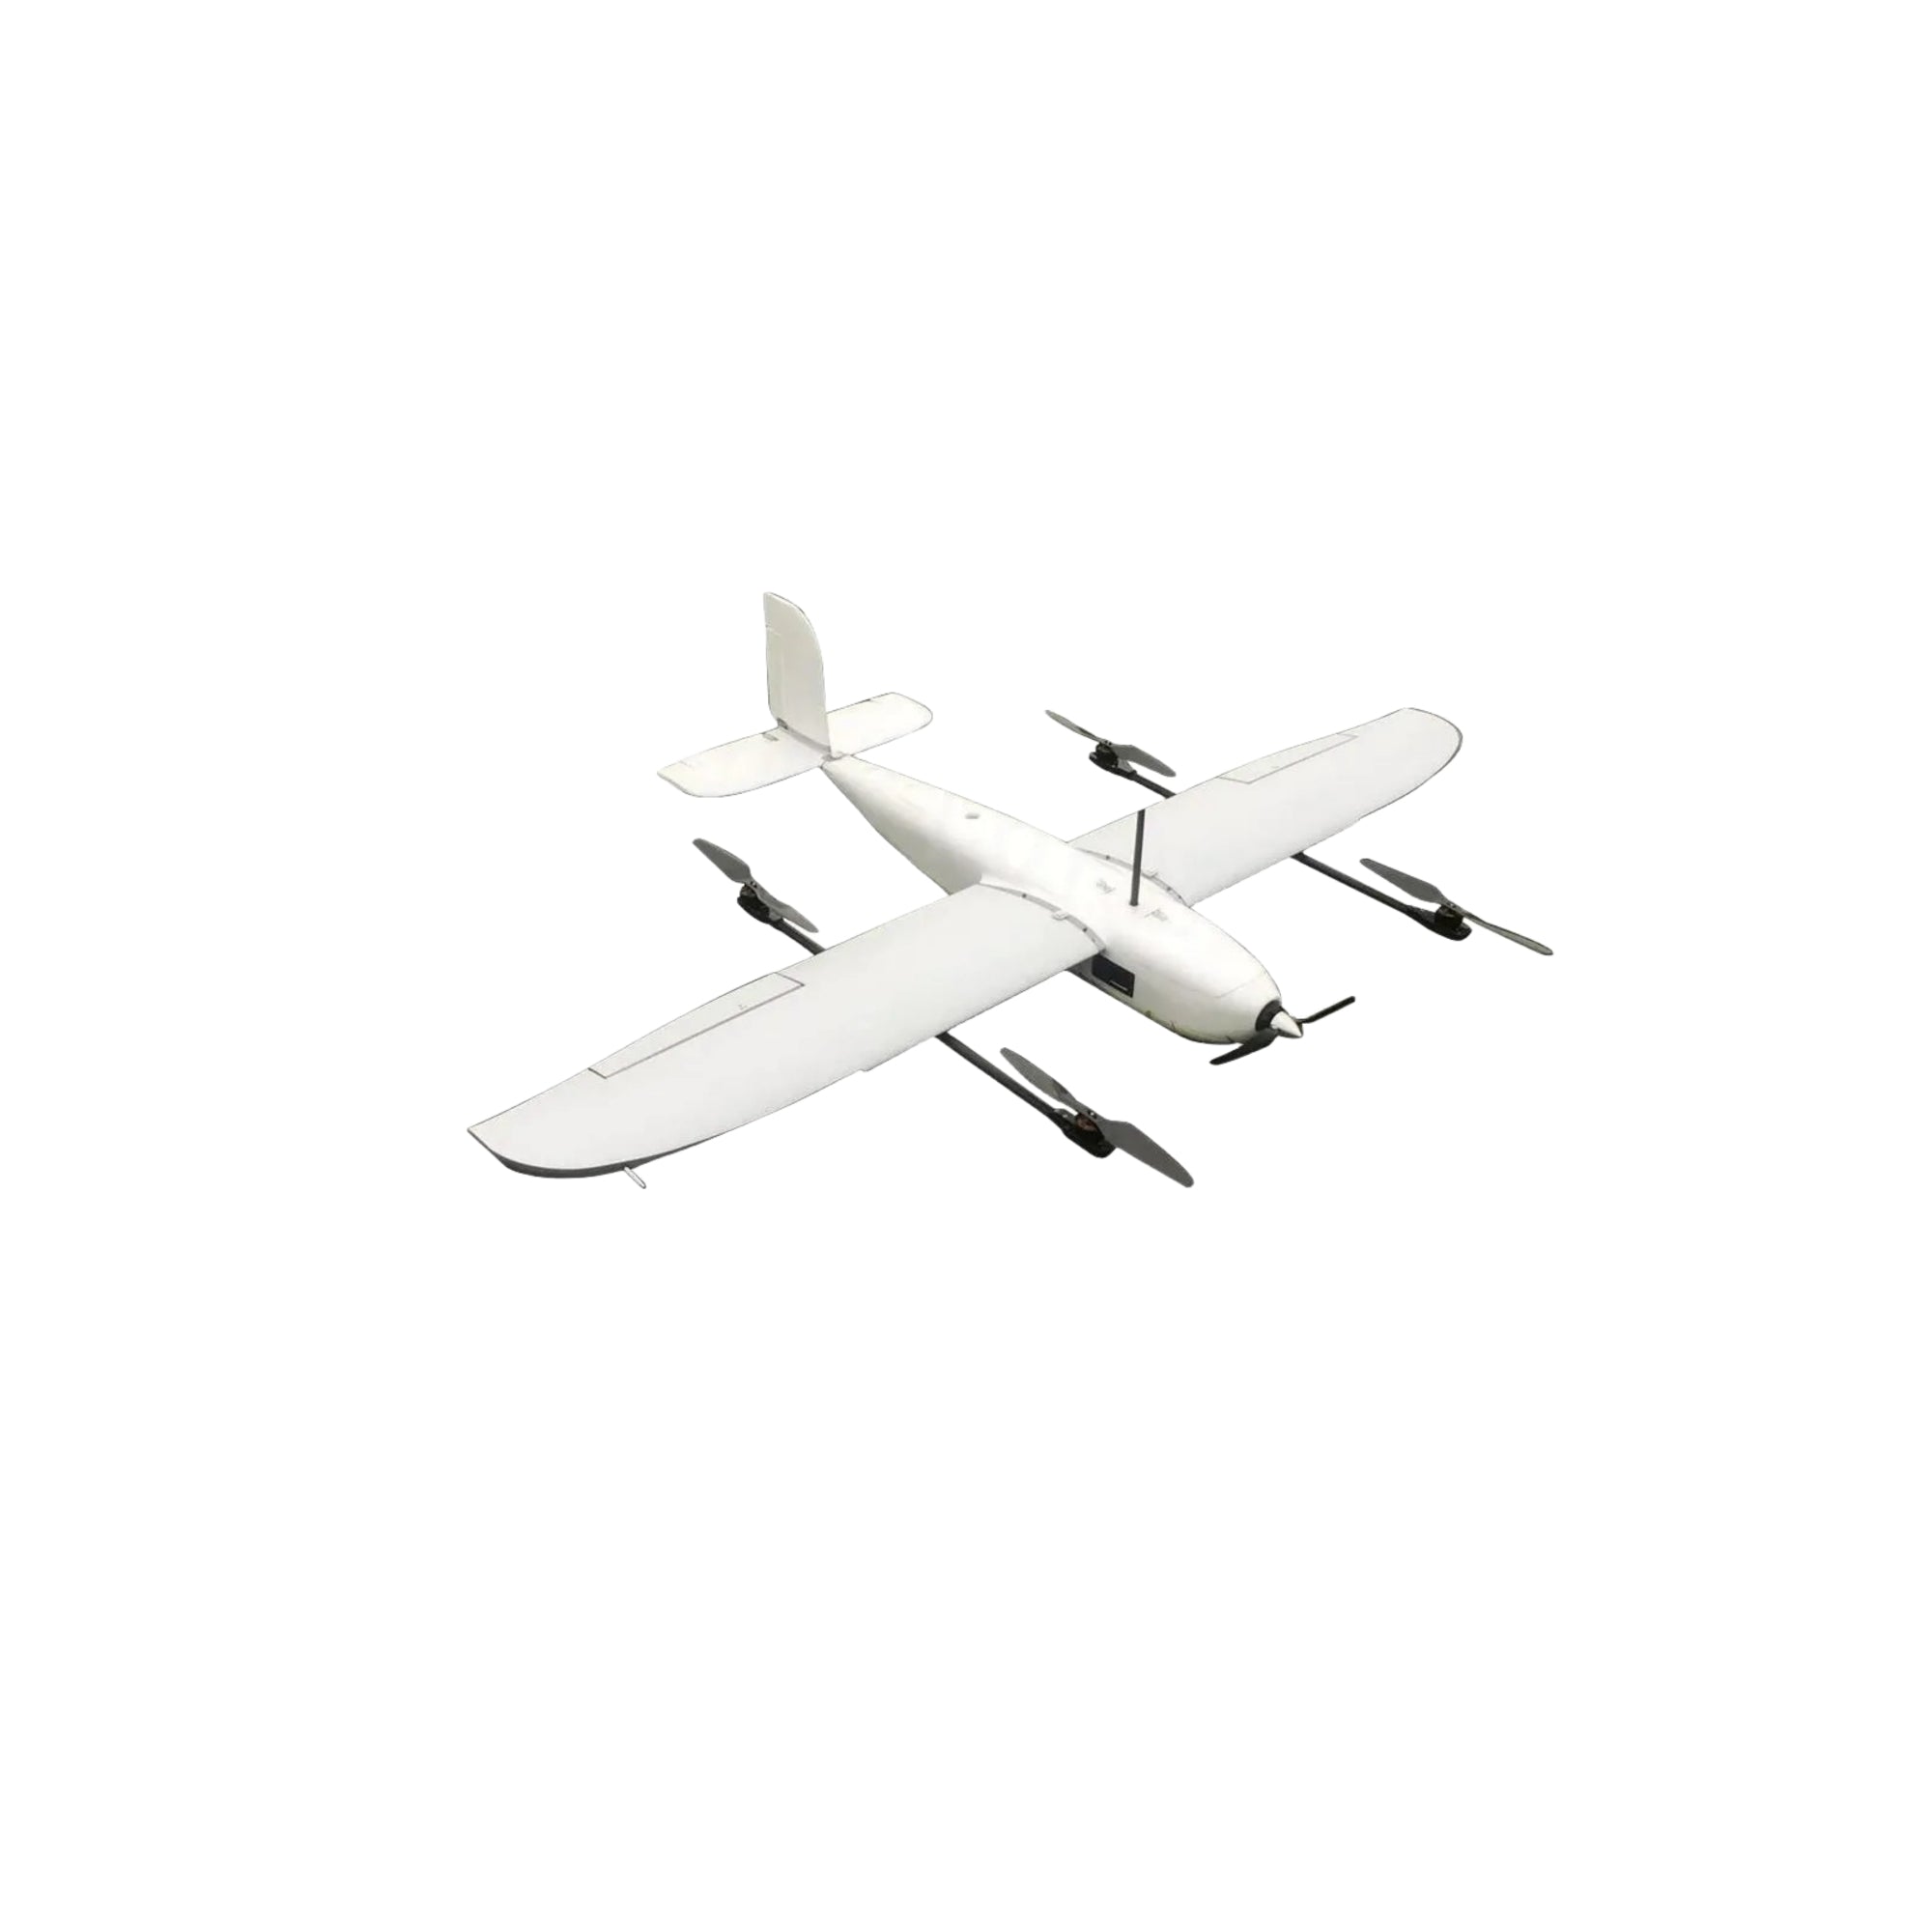 UnmannedRC Dragon EPO VTOL Plane For Drone Mapping and Aerial Surveying - Unmanned RC